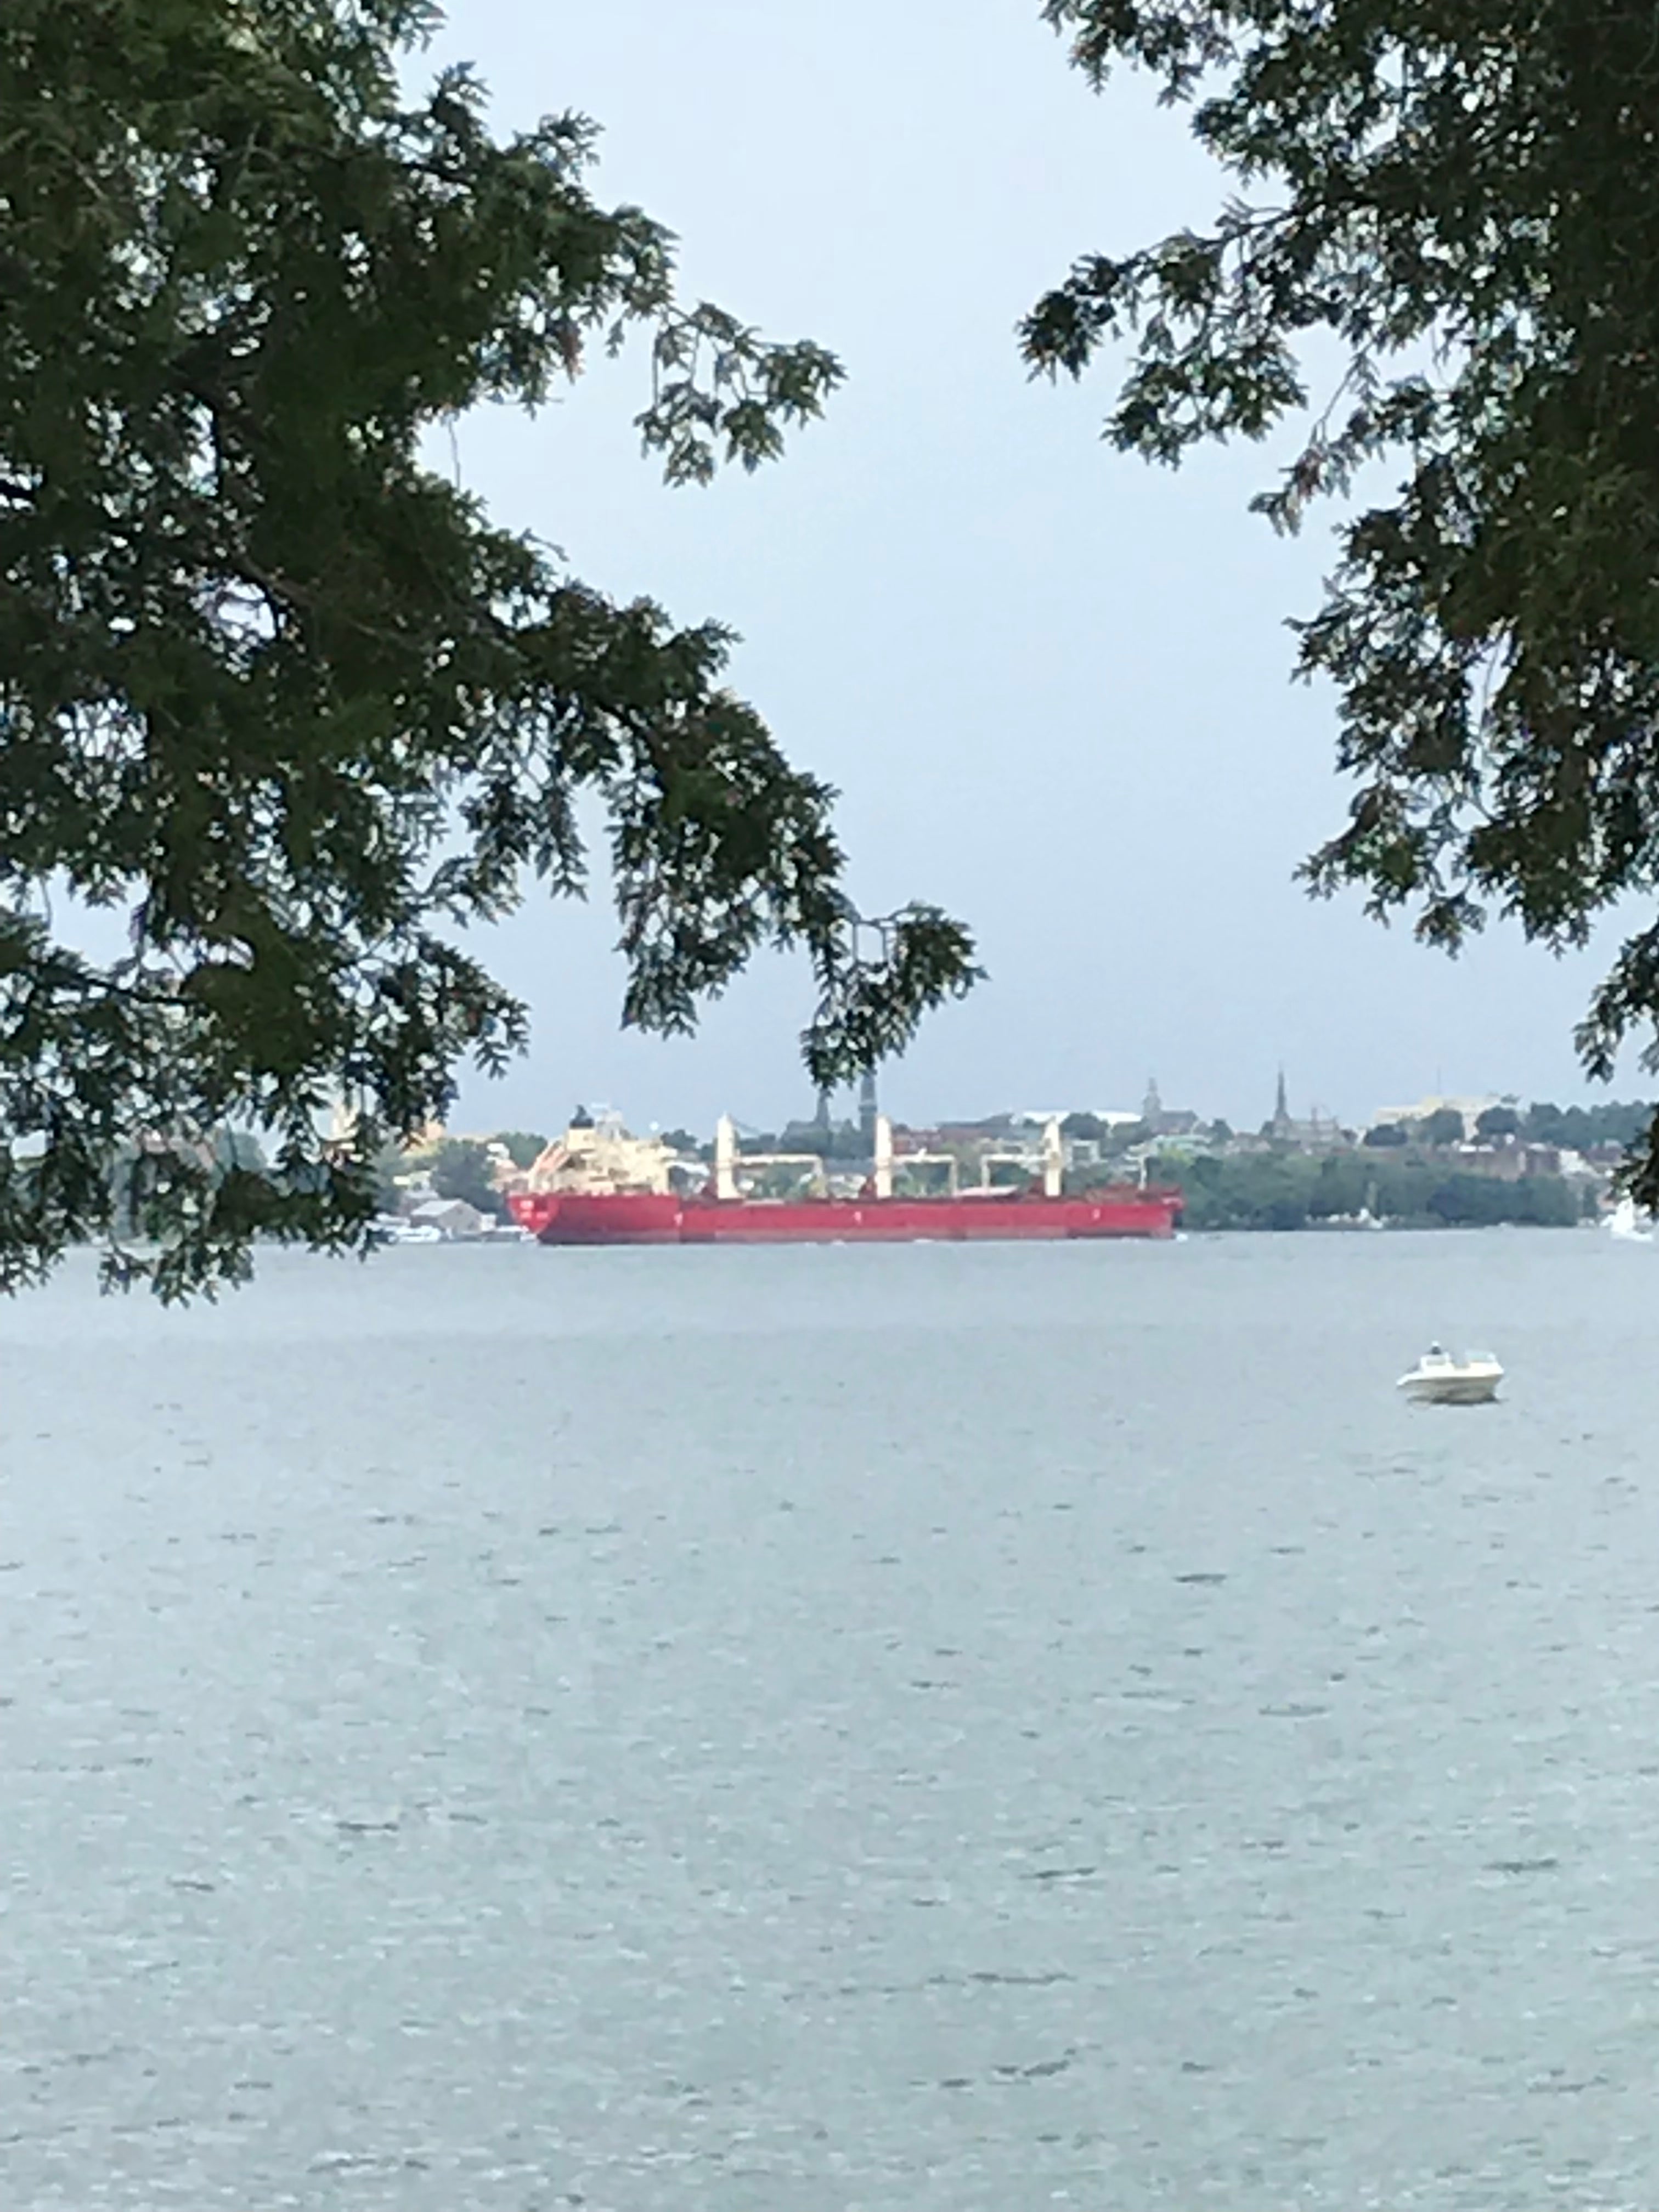 Ship on the St. Lawrence River